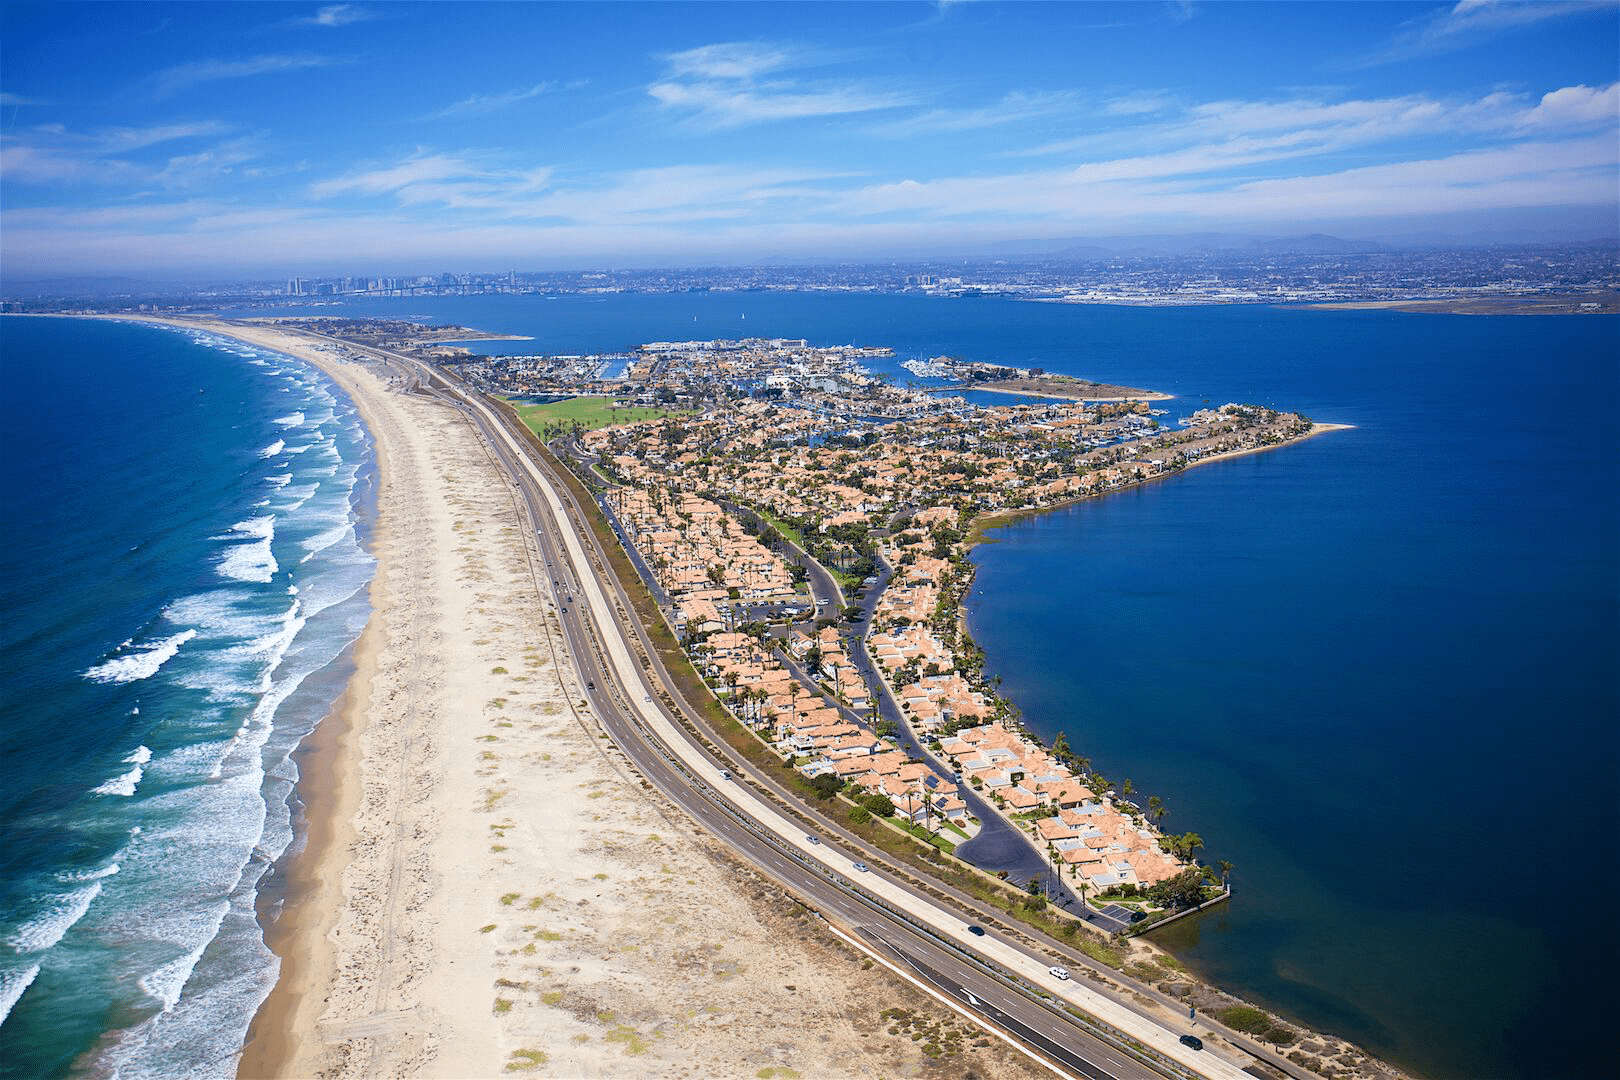 Aerial View of the Coronado Strand with Ocean Waves Hitting the Sandy Beaches and Homes on the Other Side of the Strand